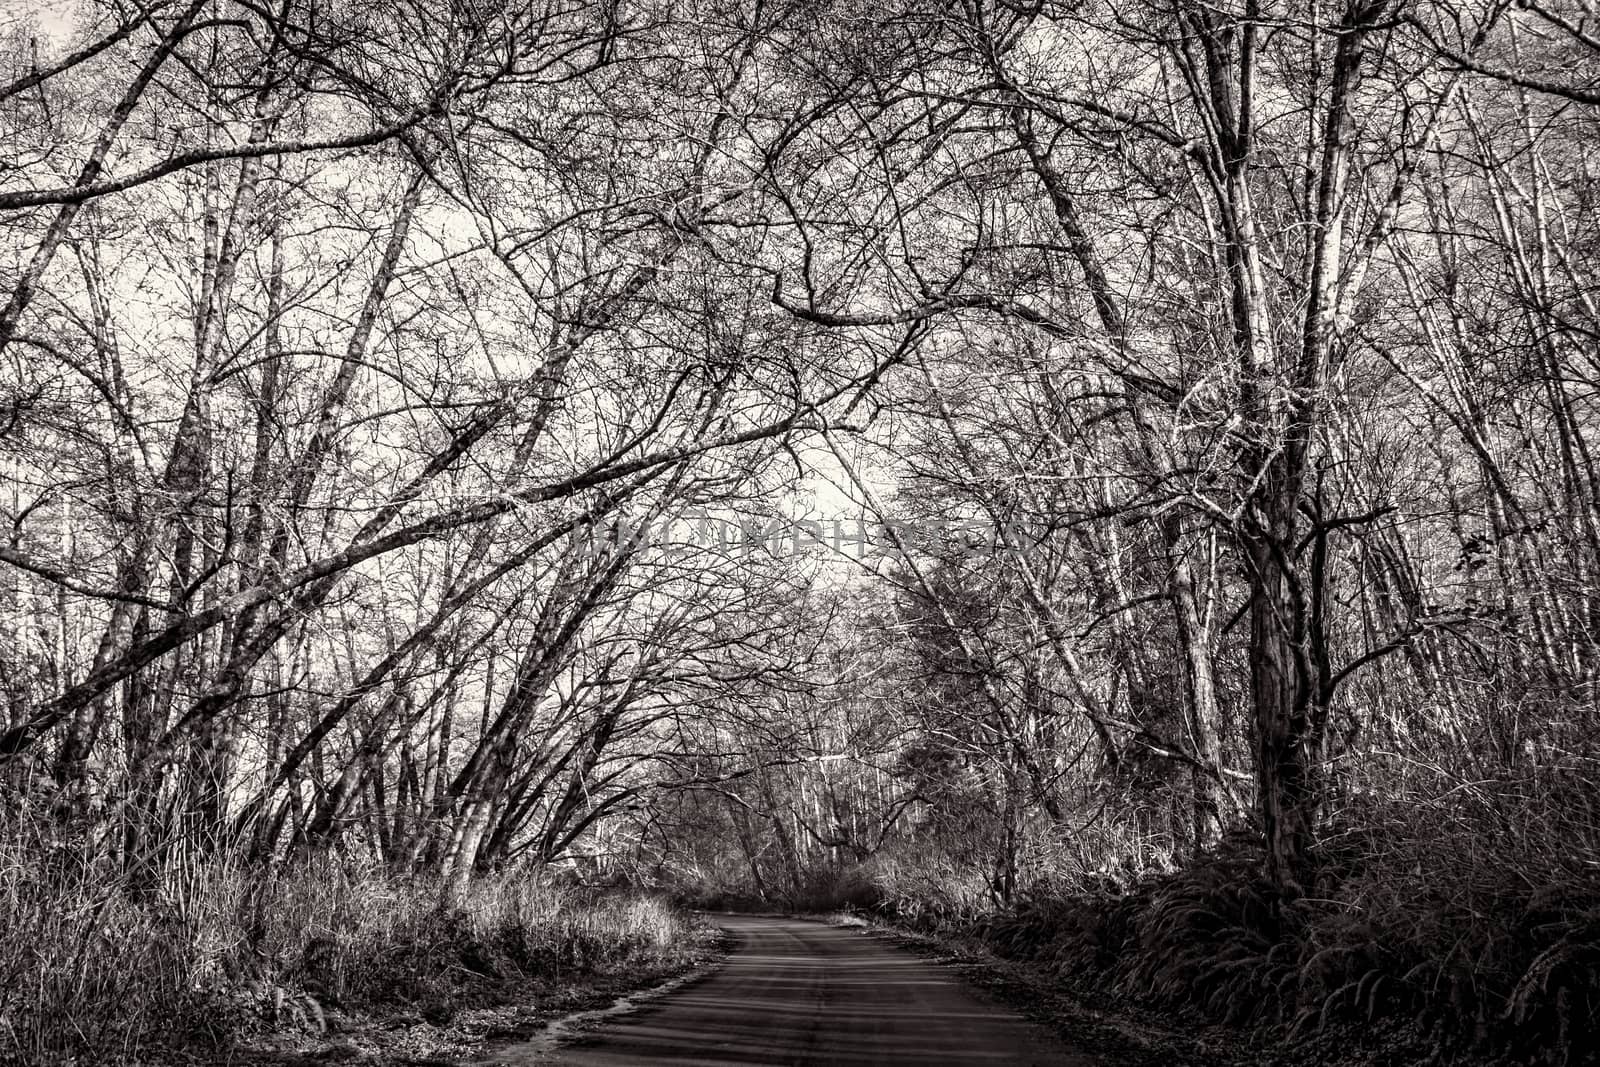 Tree Lined Road, Black and White, Landscape